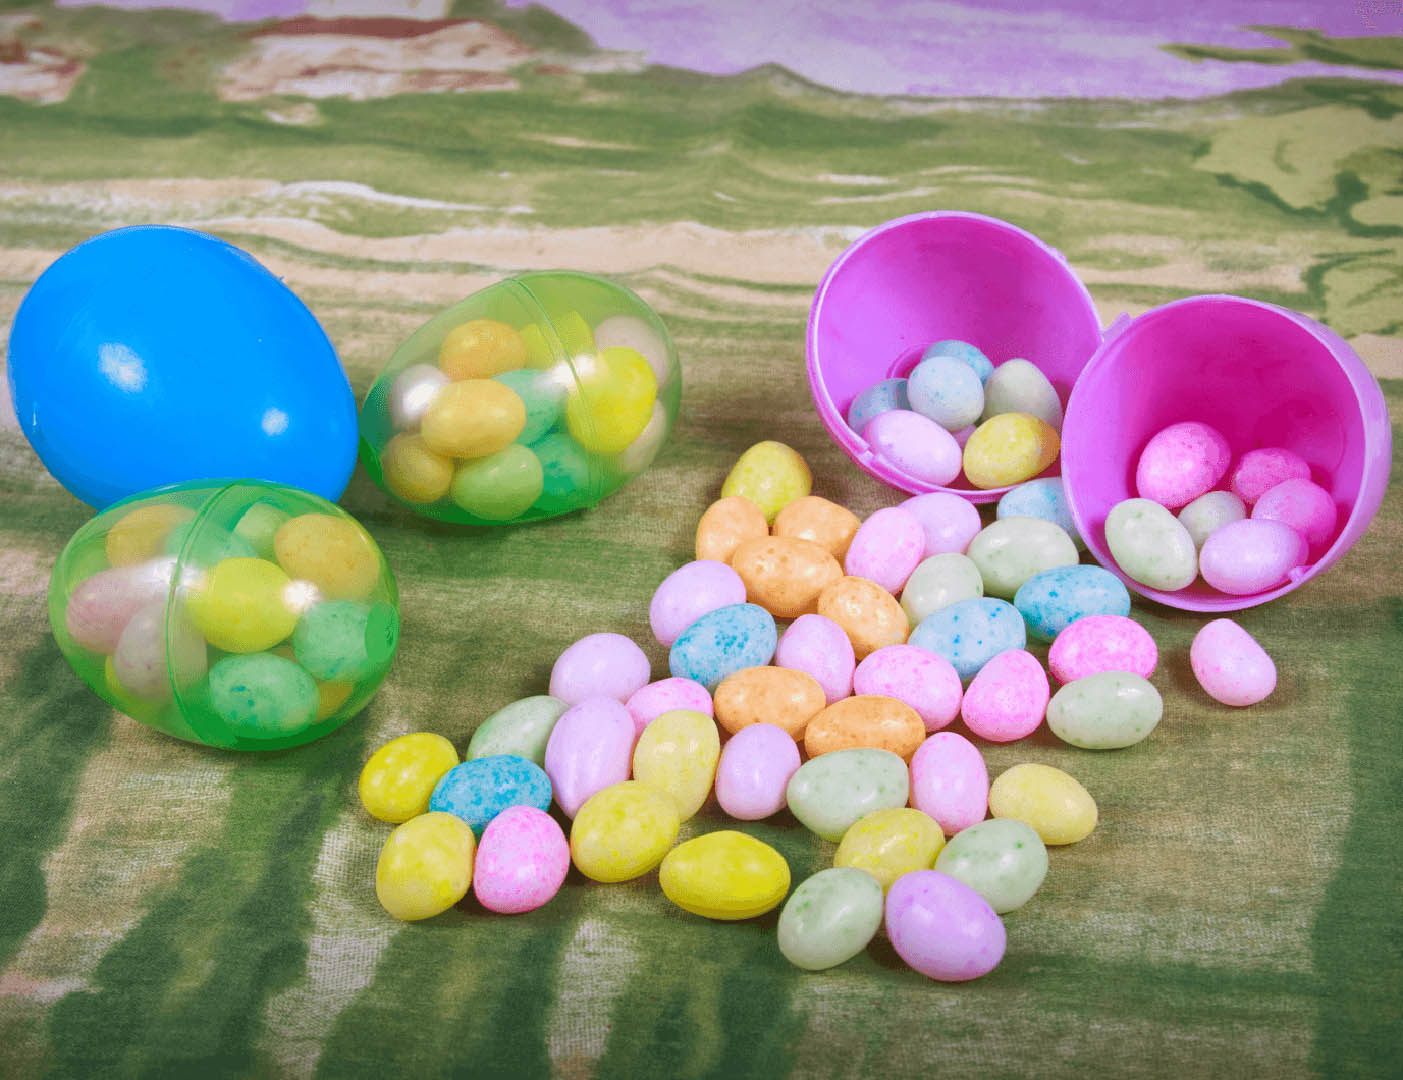 Fun Family Easter Traditions to Try This Year Eggs Image